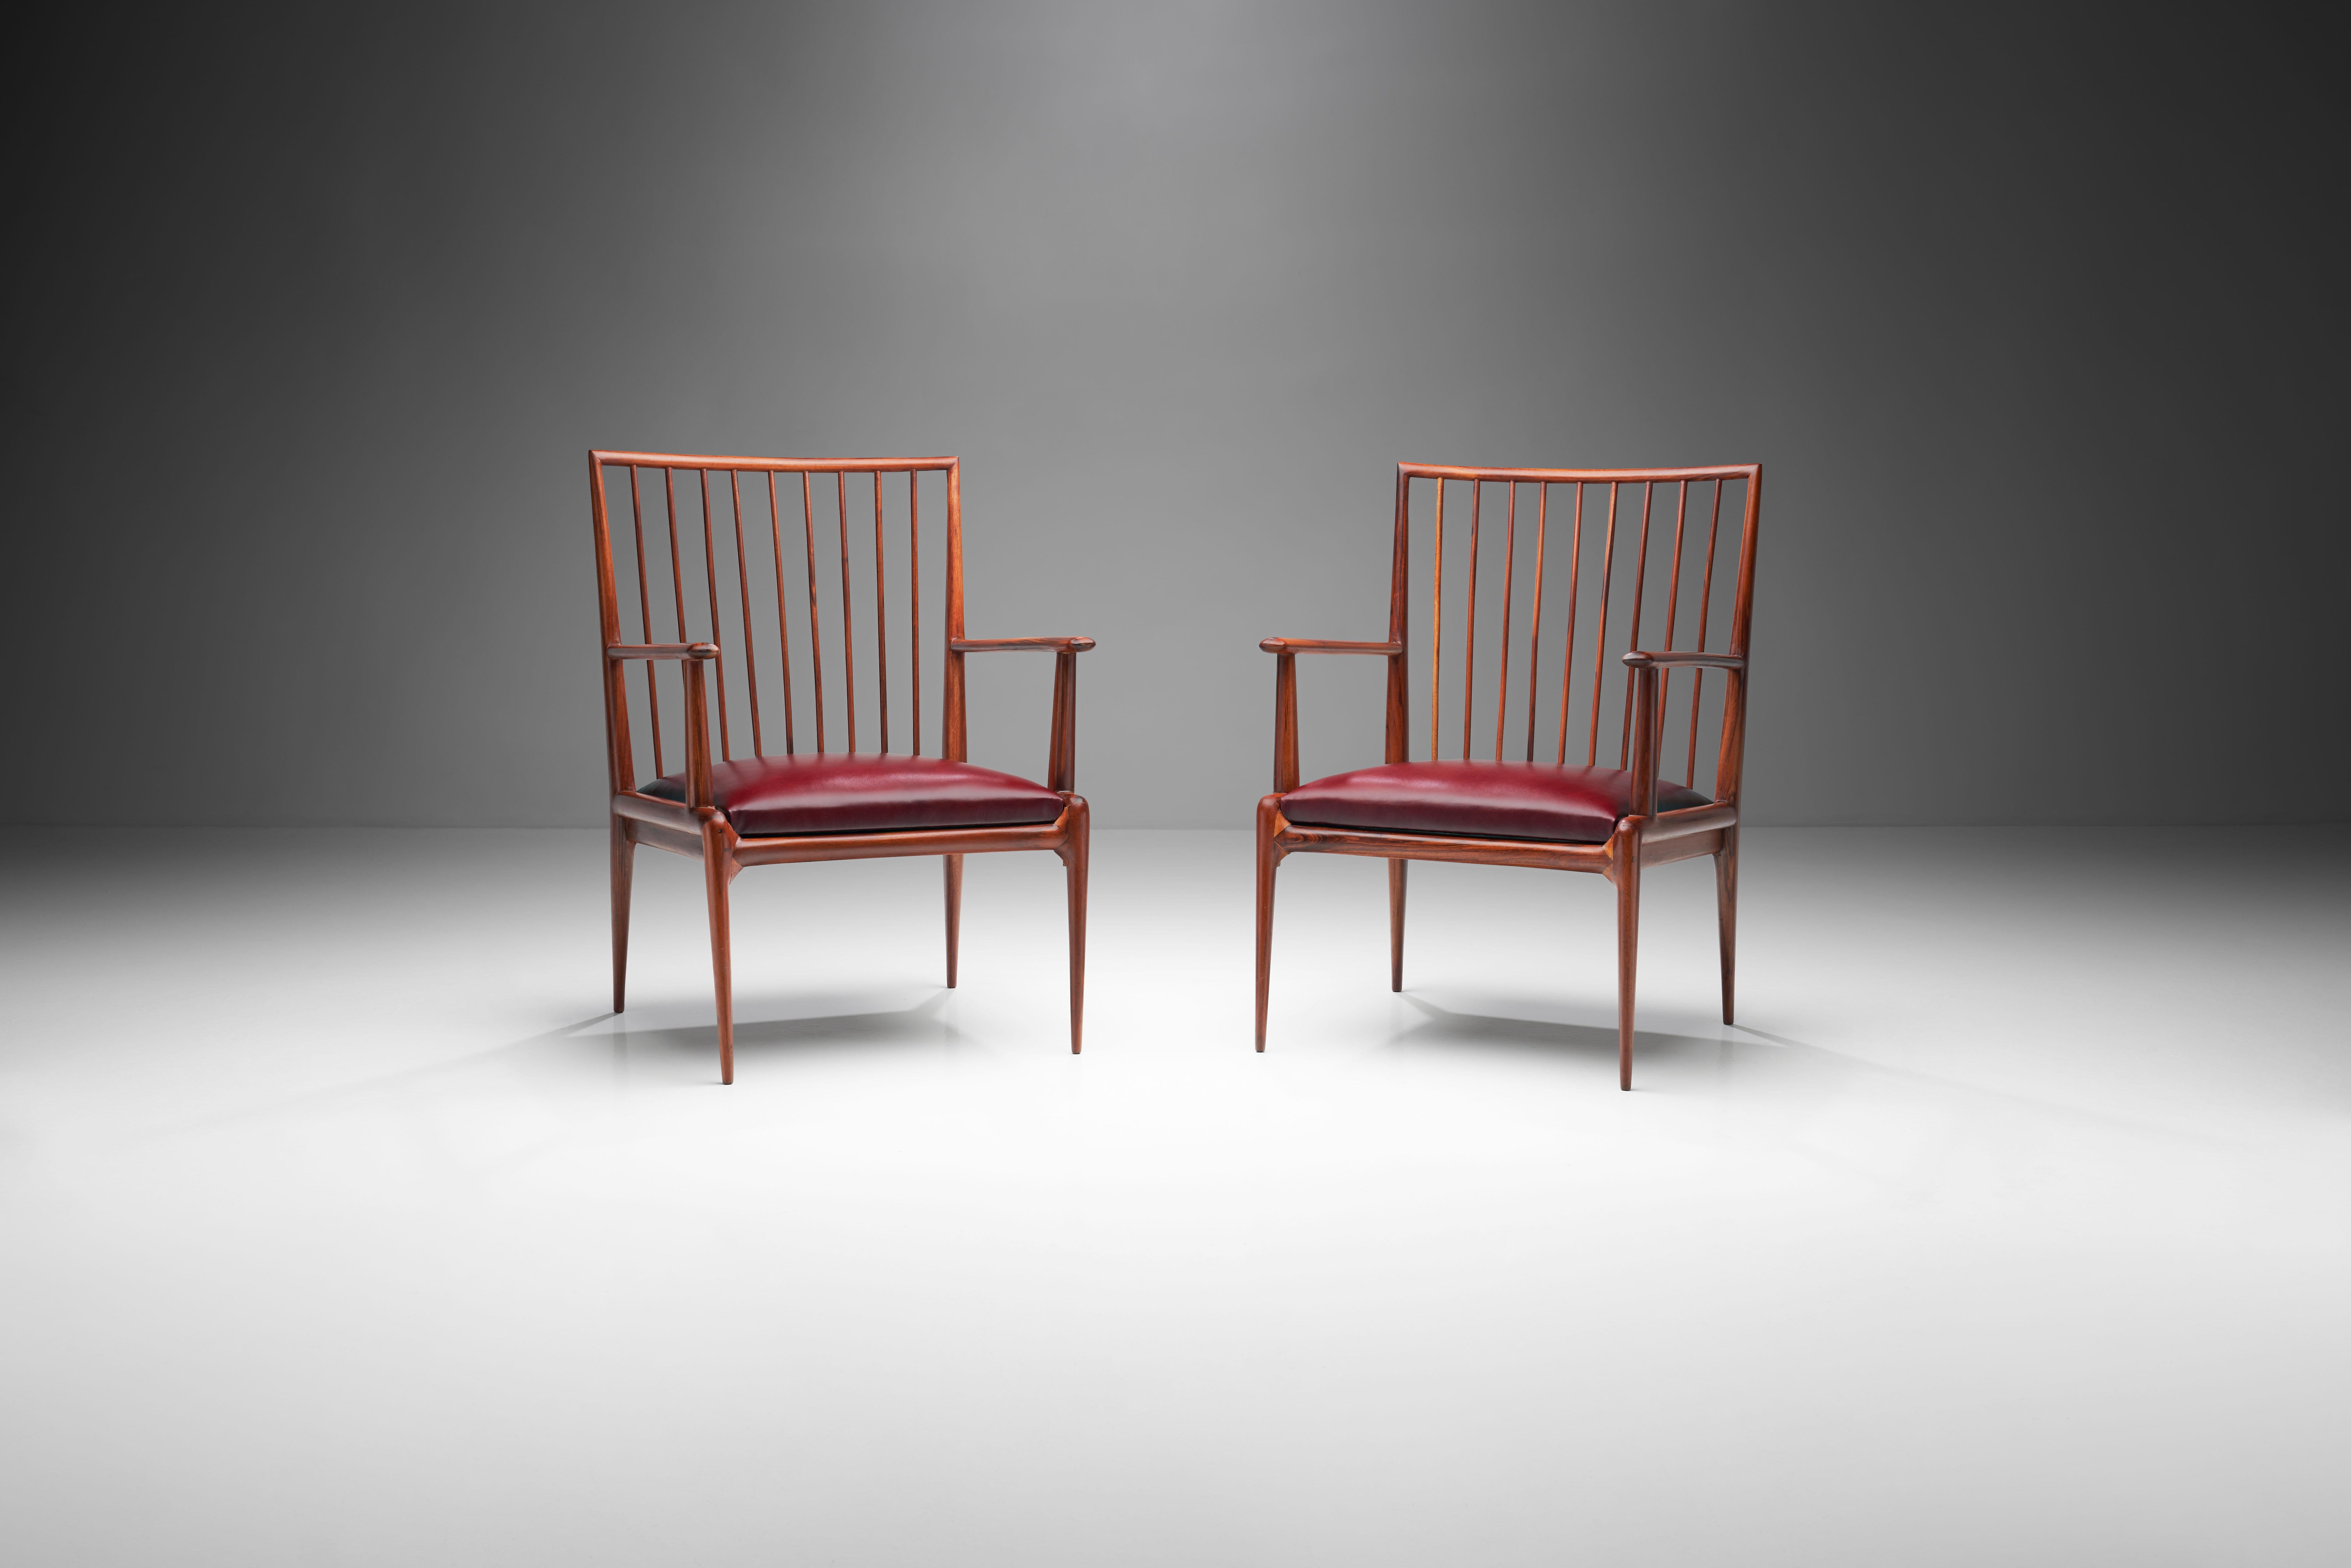 Mid-Century Modern Pair of Mid-Century Chairs by Branco & Preto 'Attr.', Brazil, 1950s For Sale